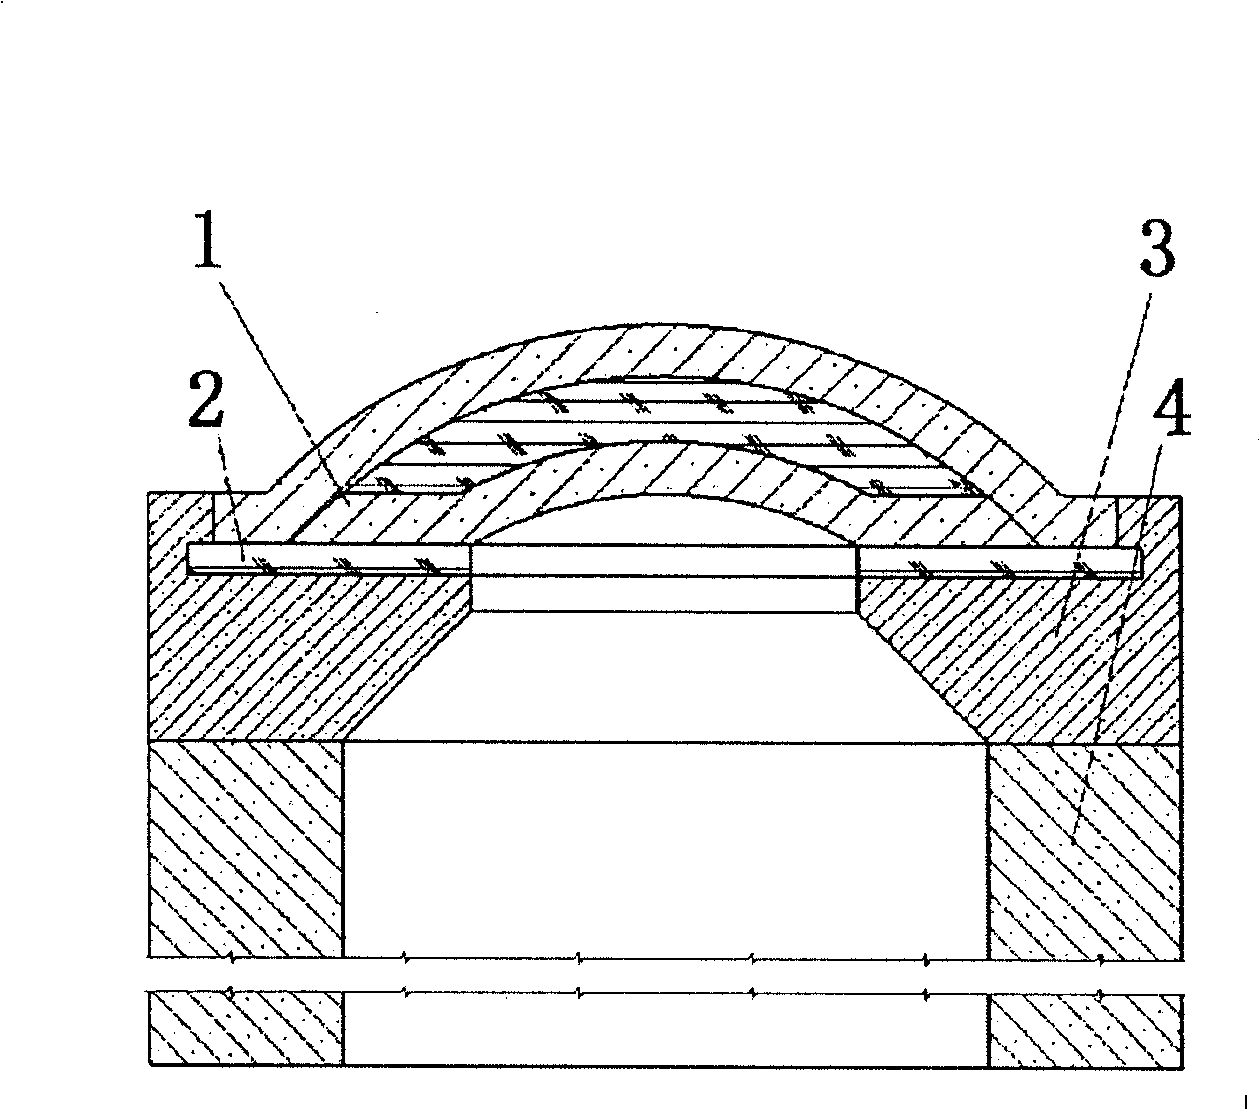 Ablate spherical well cover with multi-layer casting